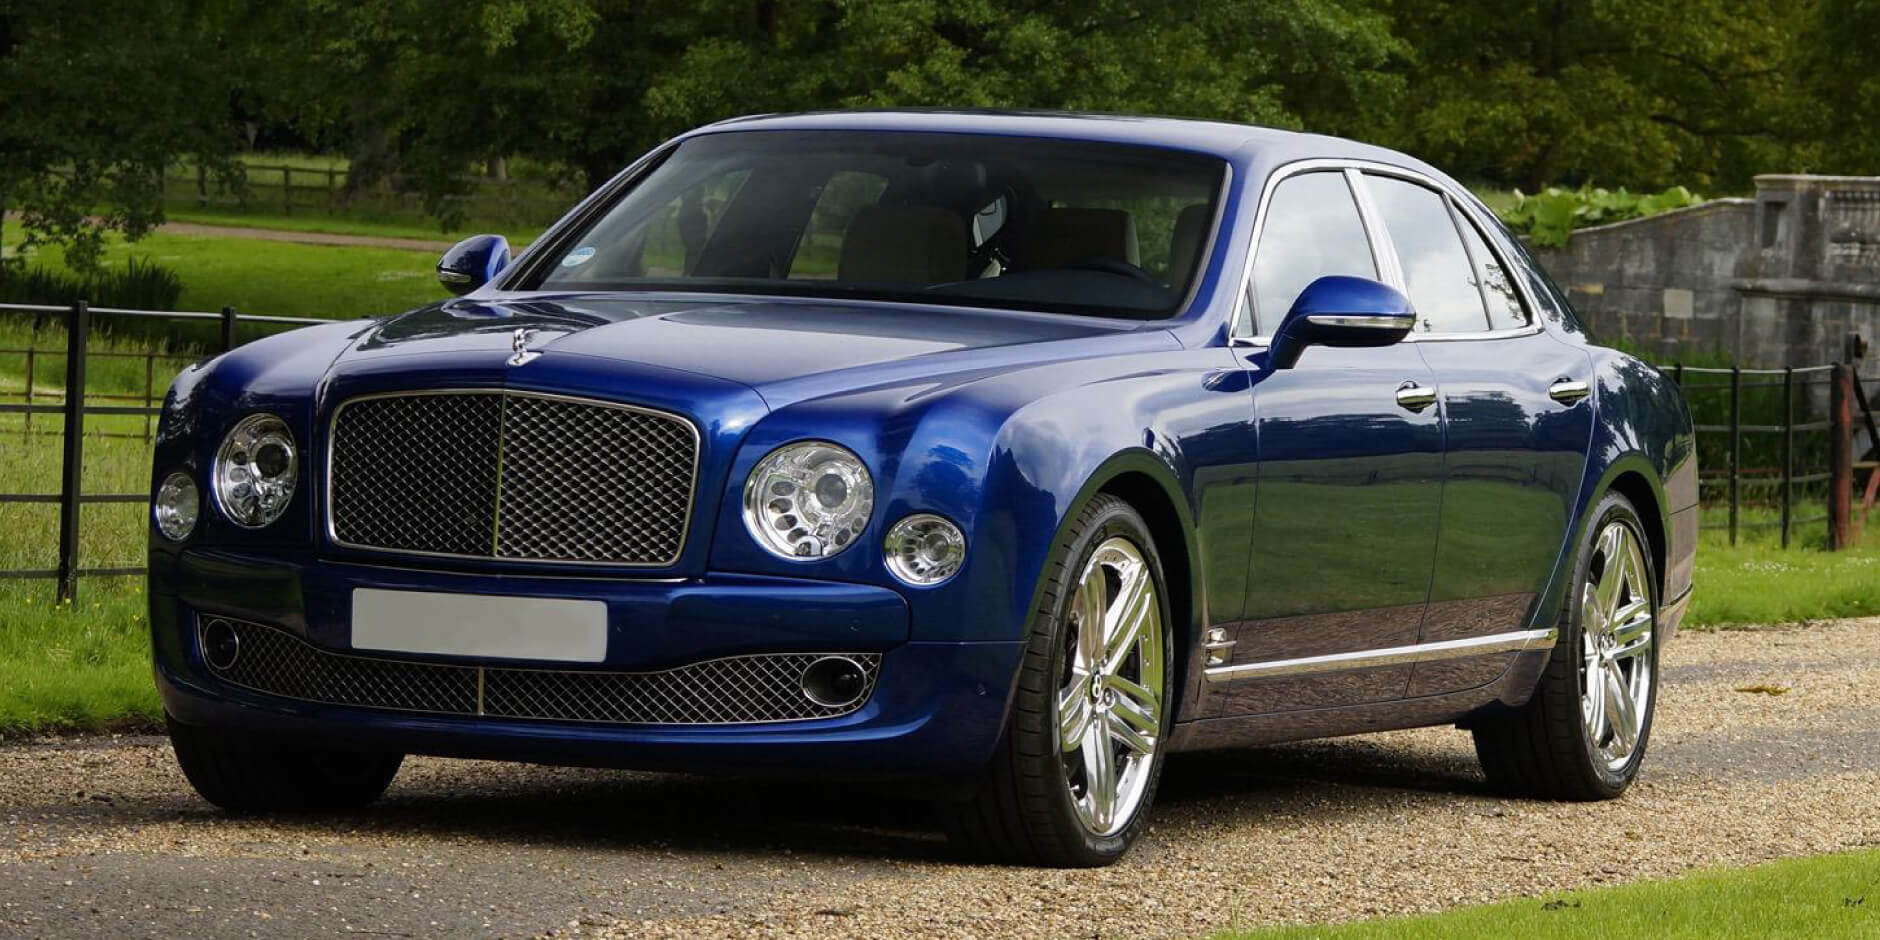 The Art of the Journey: Comparing the Bentley Mulsanne to Other Luxury Cars on UK Roads